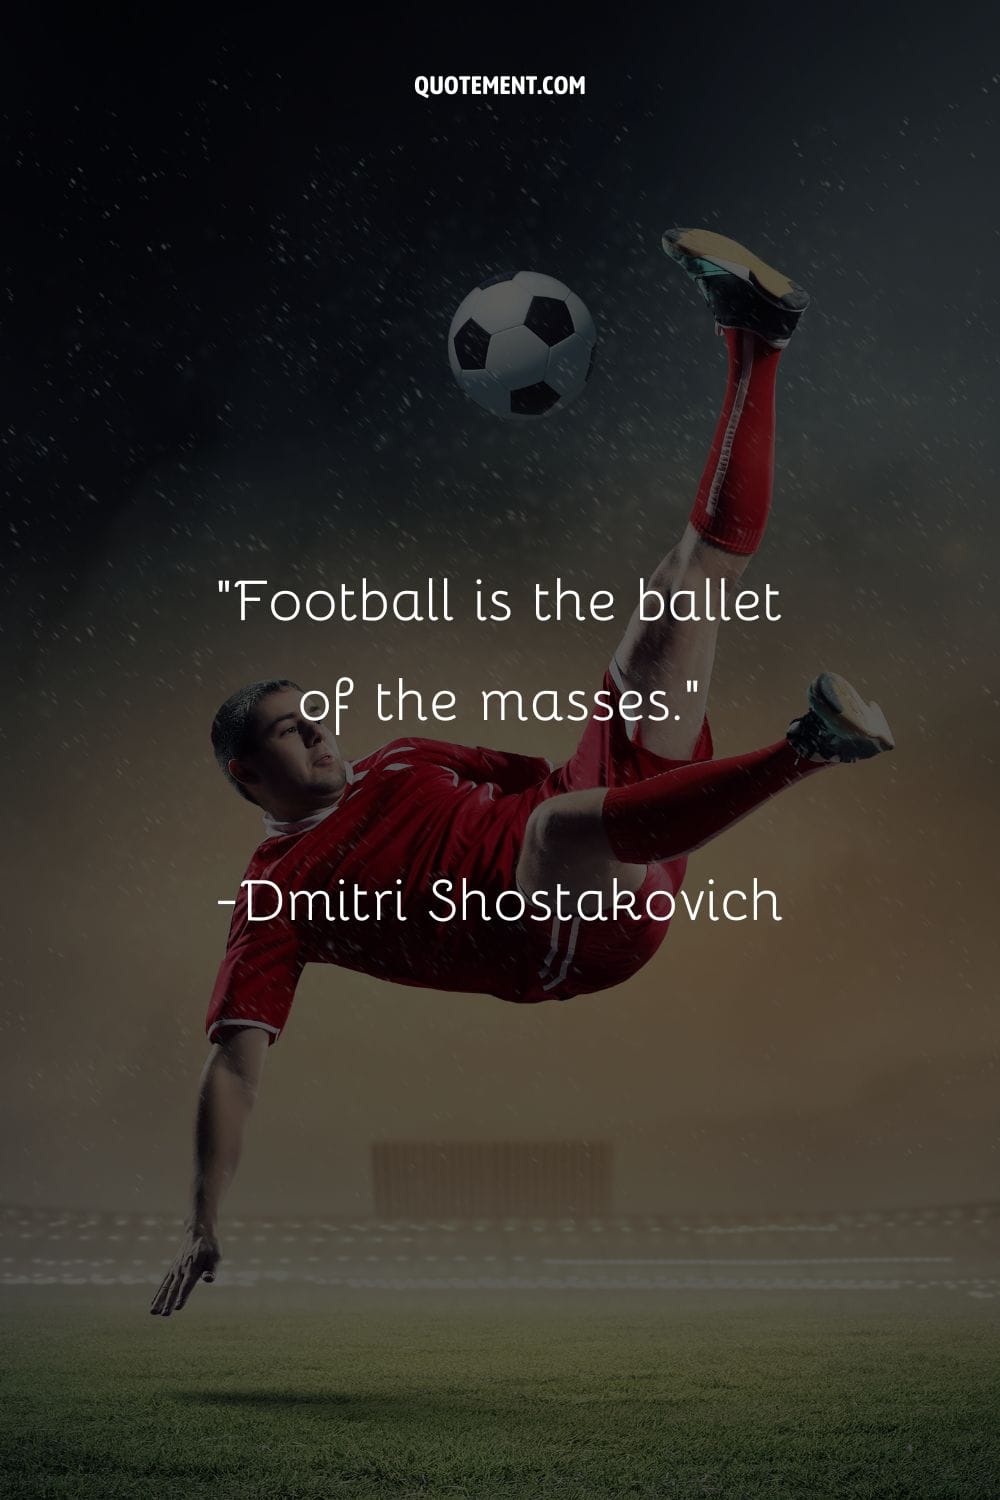 Spectacular bicycle kick under the spotlight representing famous soccer quote